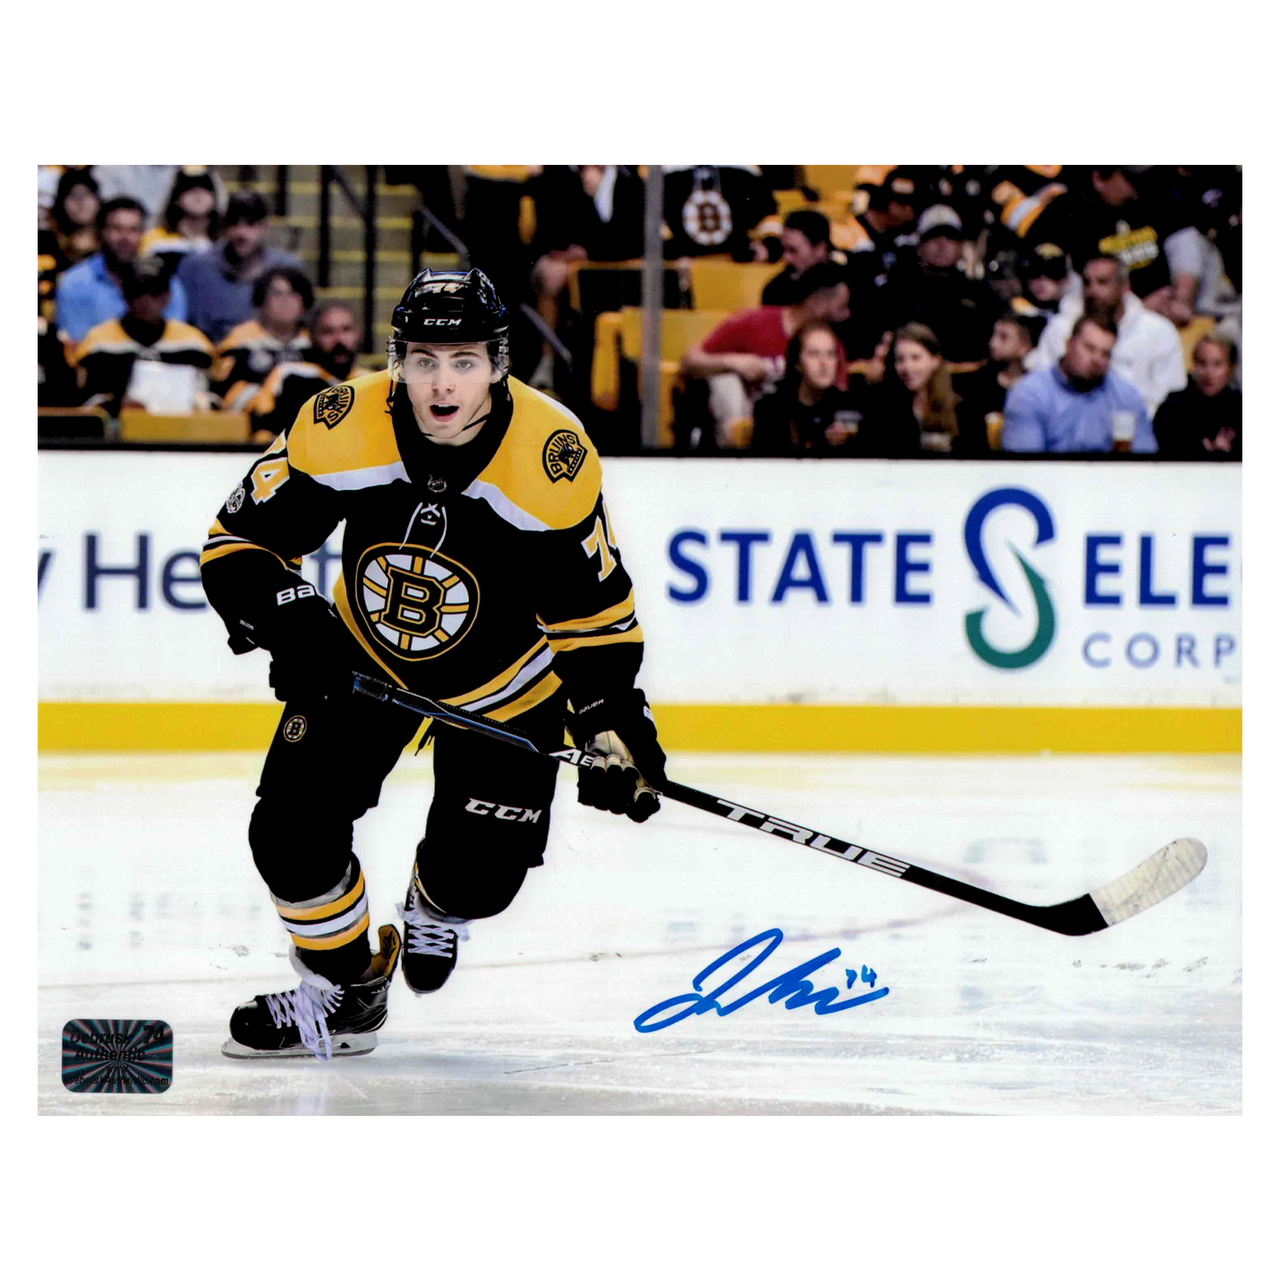 Jake DeBrusk Boston Bruins Autographed 16″ x 20″ Black Alternate Jersey  Skating Photograph with “Boston's Team” Inscription – Limited Edition of 20